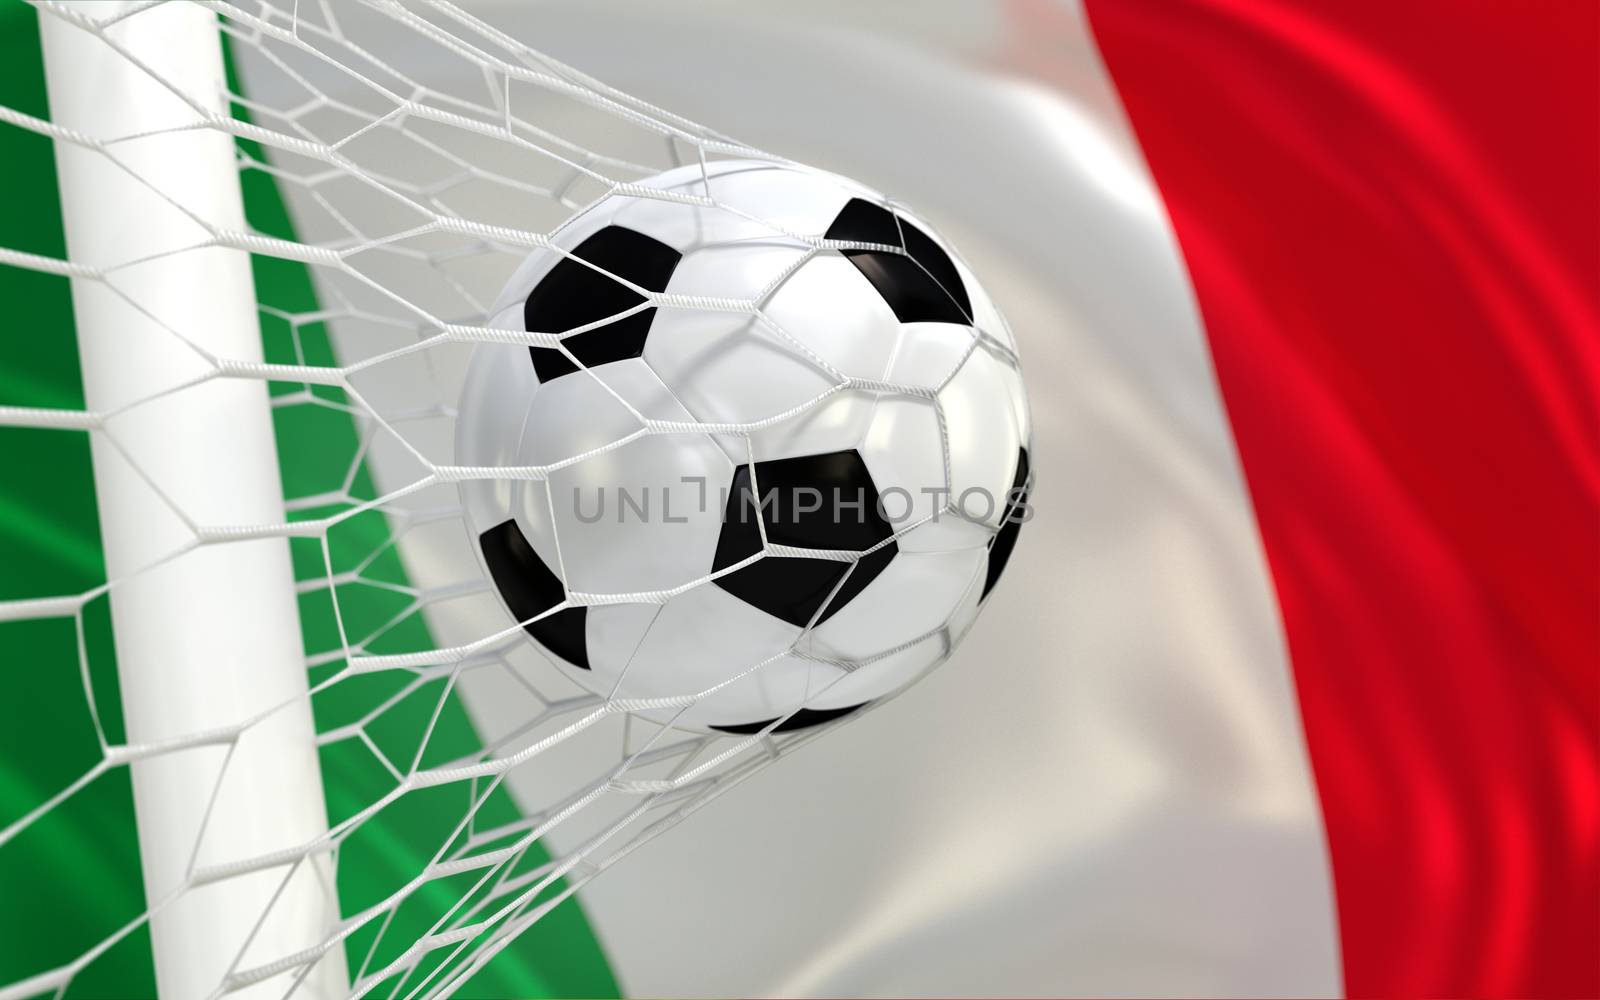 Italy waving flag and soccer ball in goal net by Barbraford